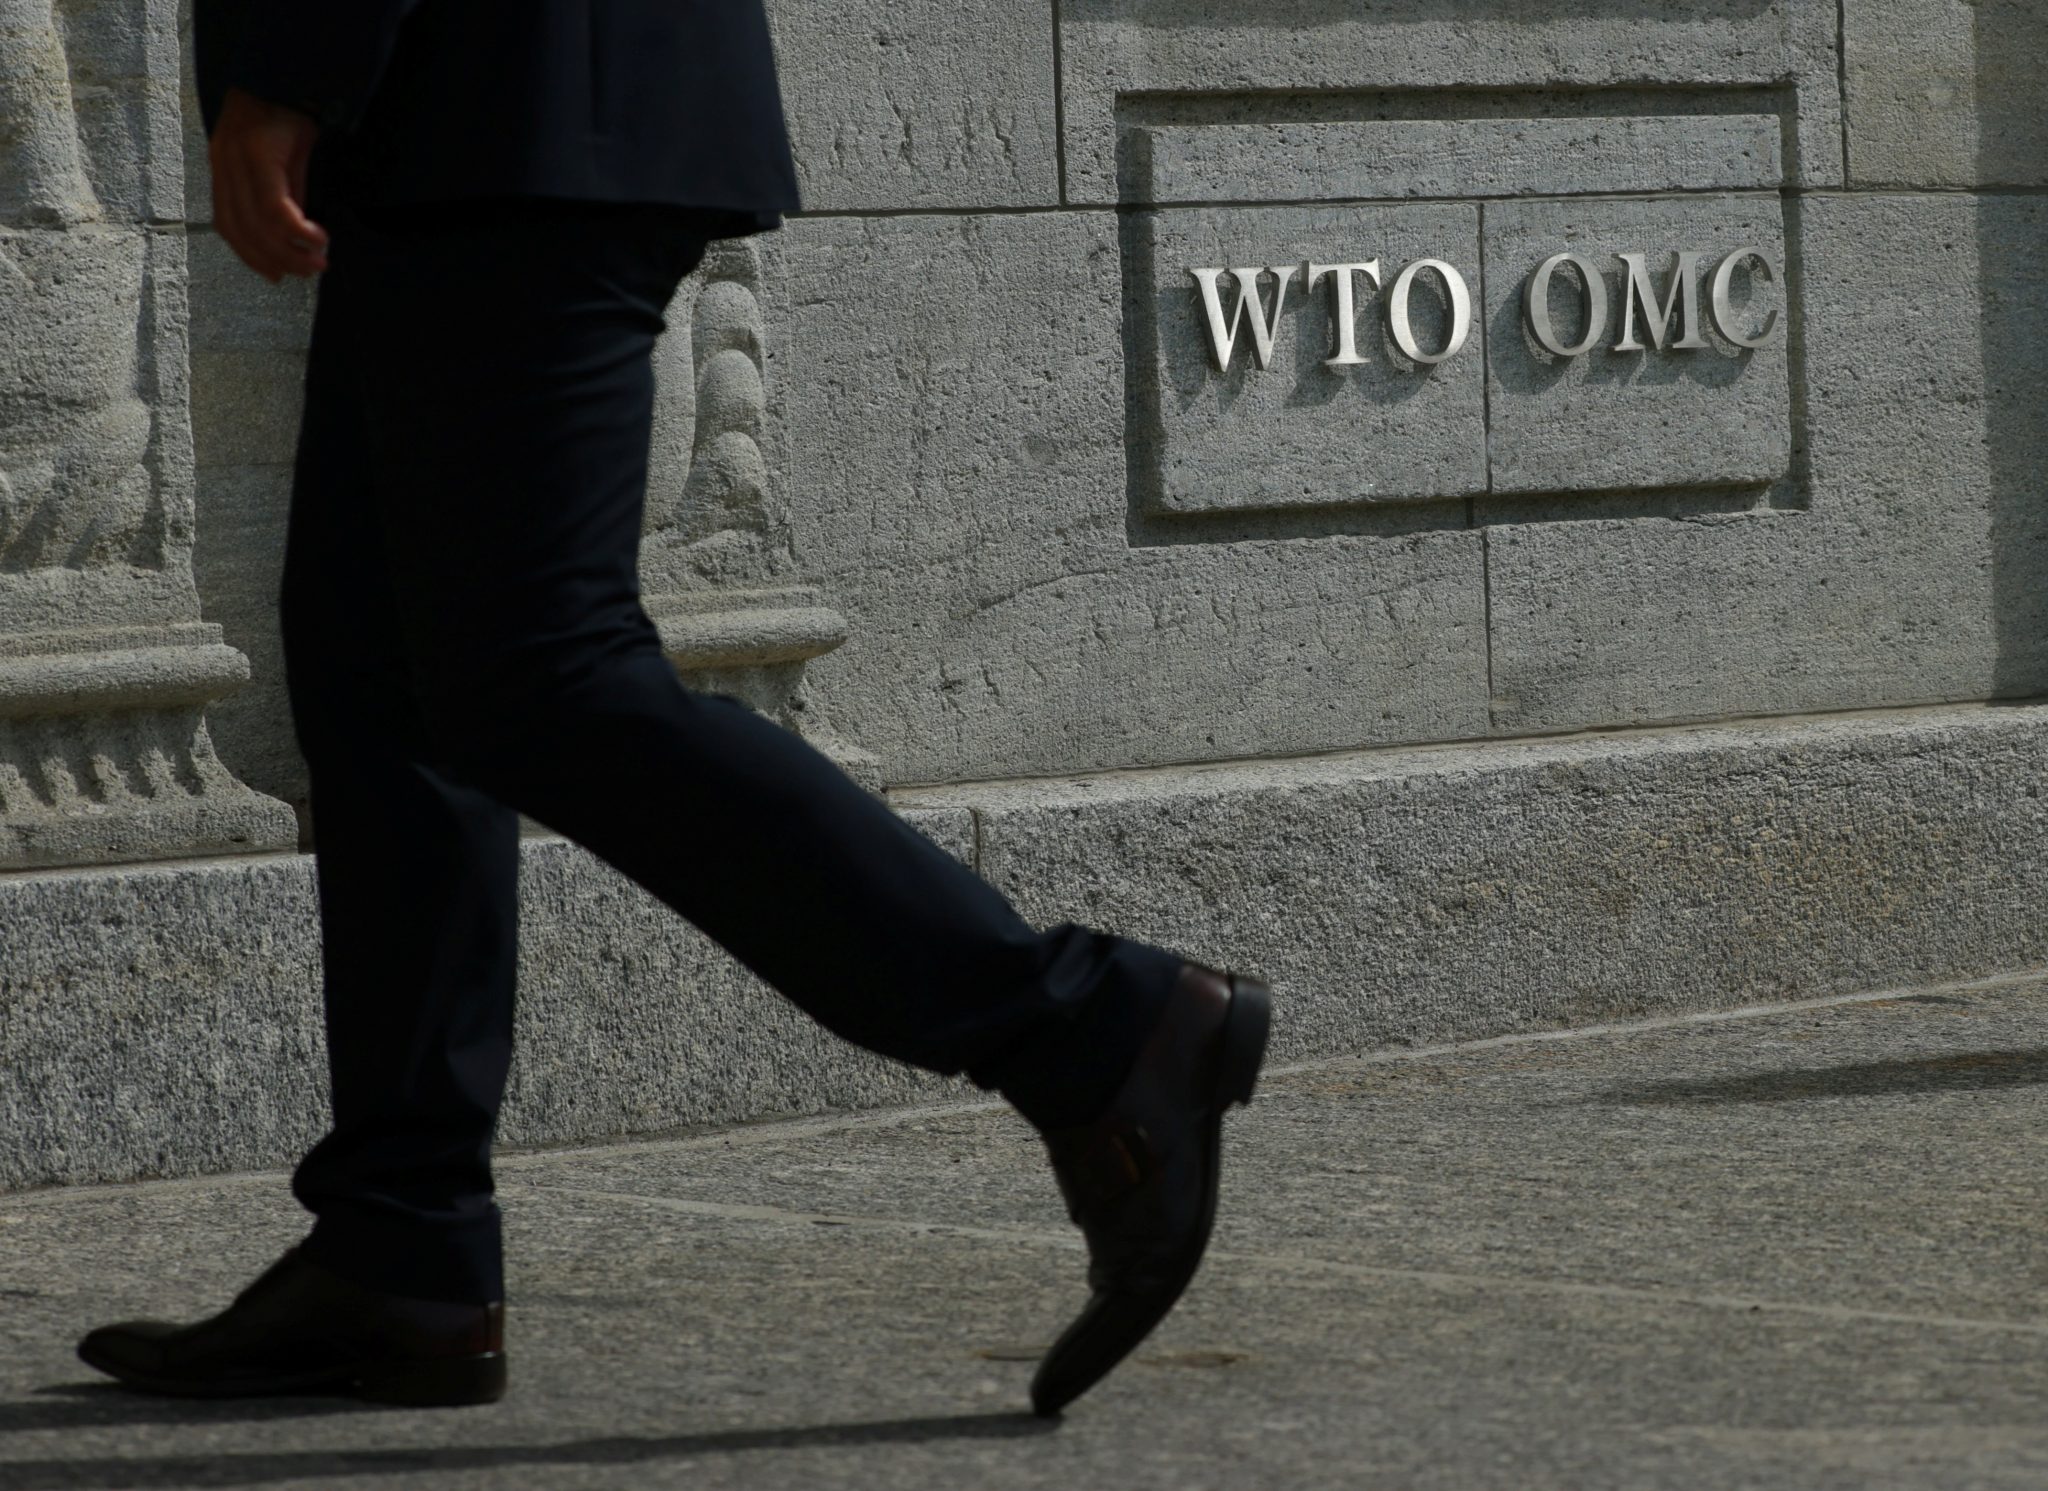 What a multi-phased reform strategy of the WTO should look like